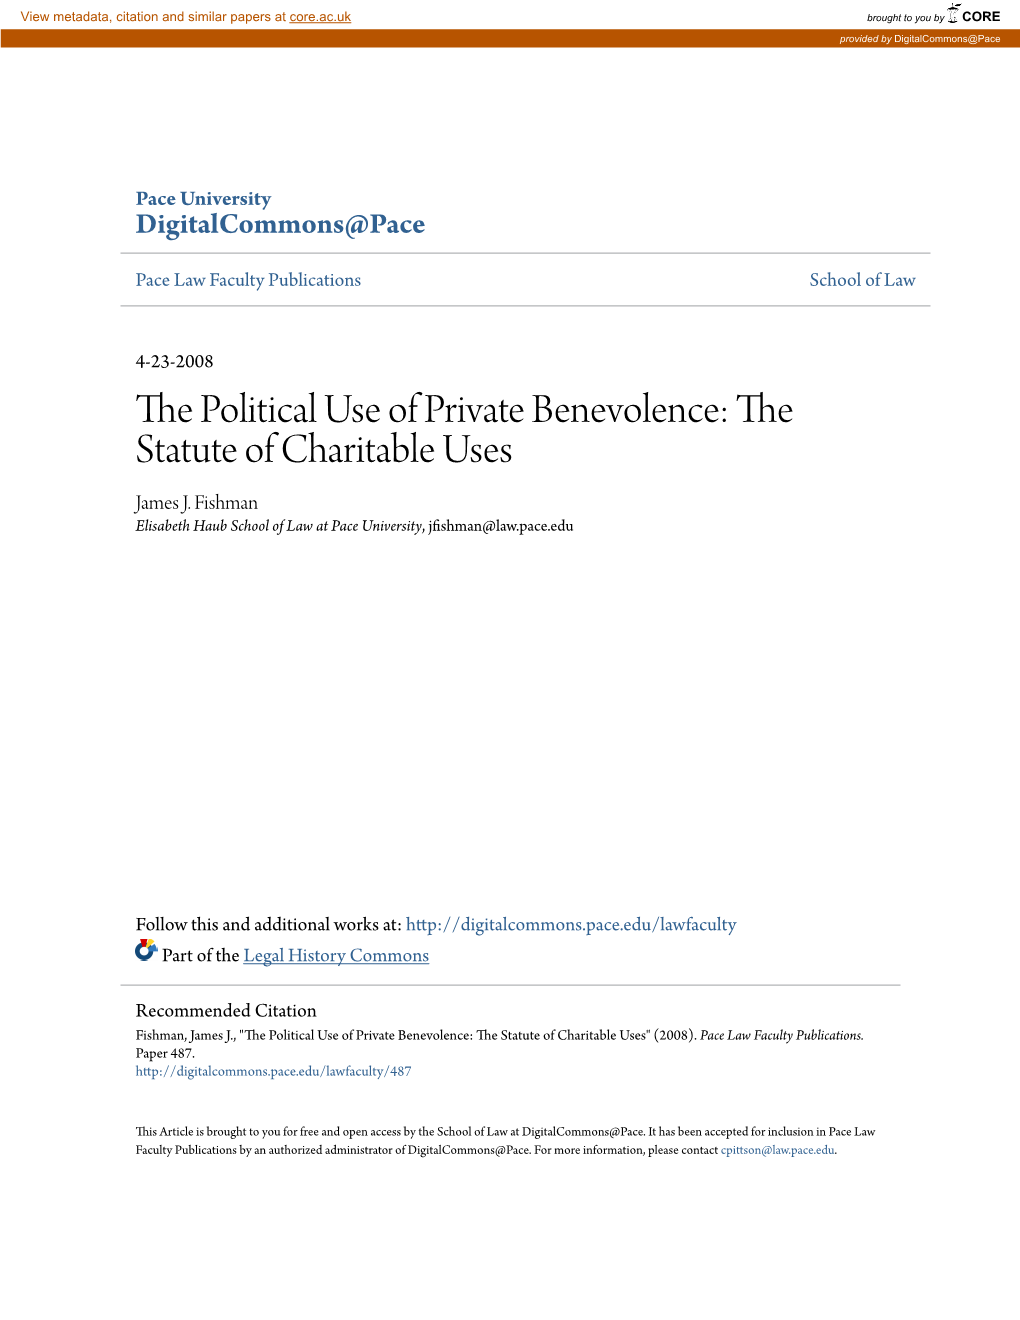 The Political Use of Private Benevolence: the Statute Of